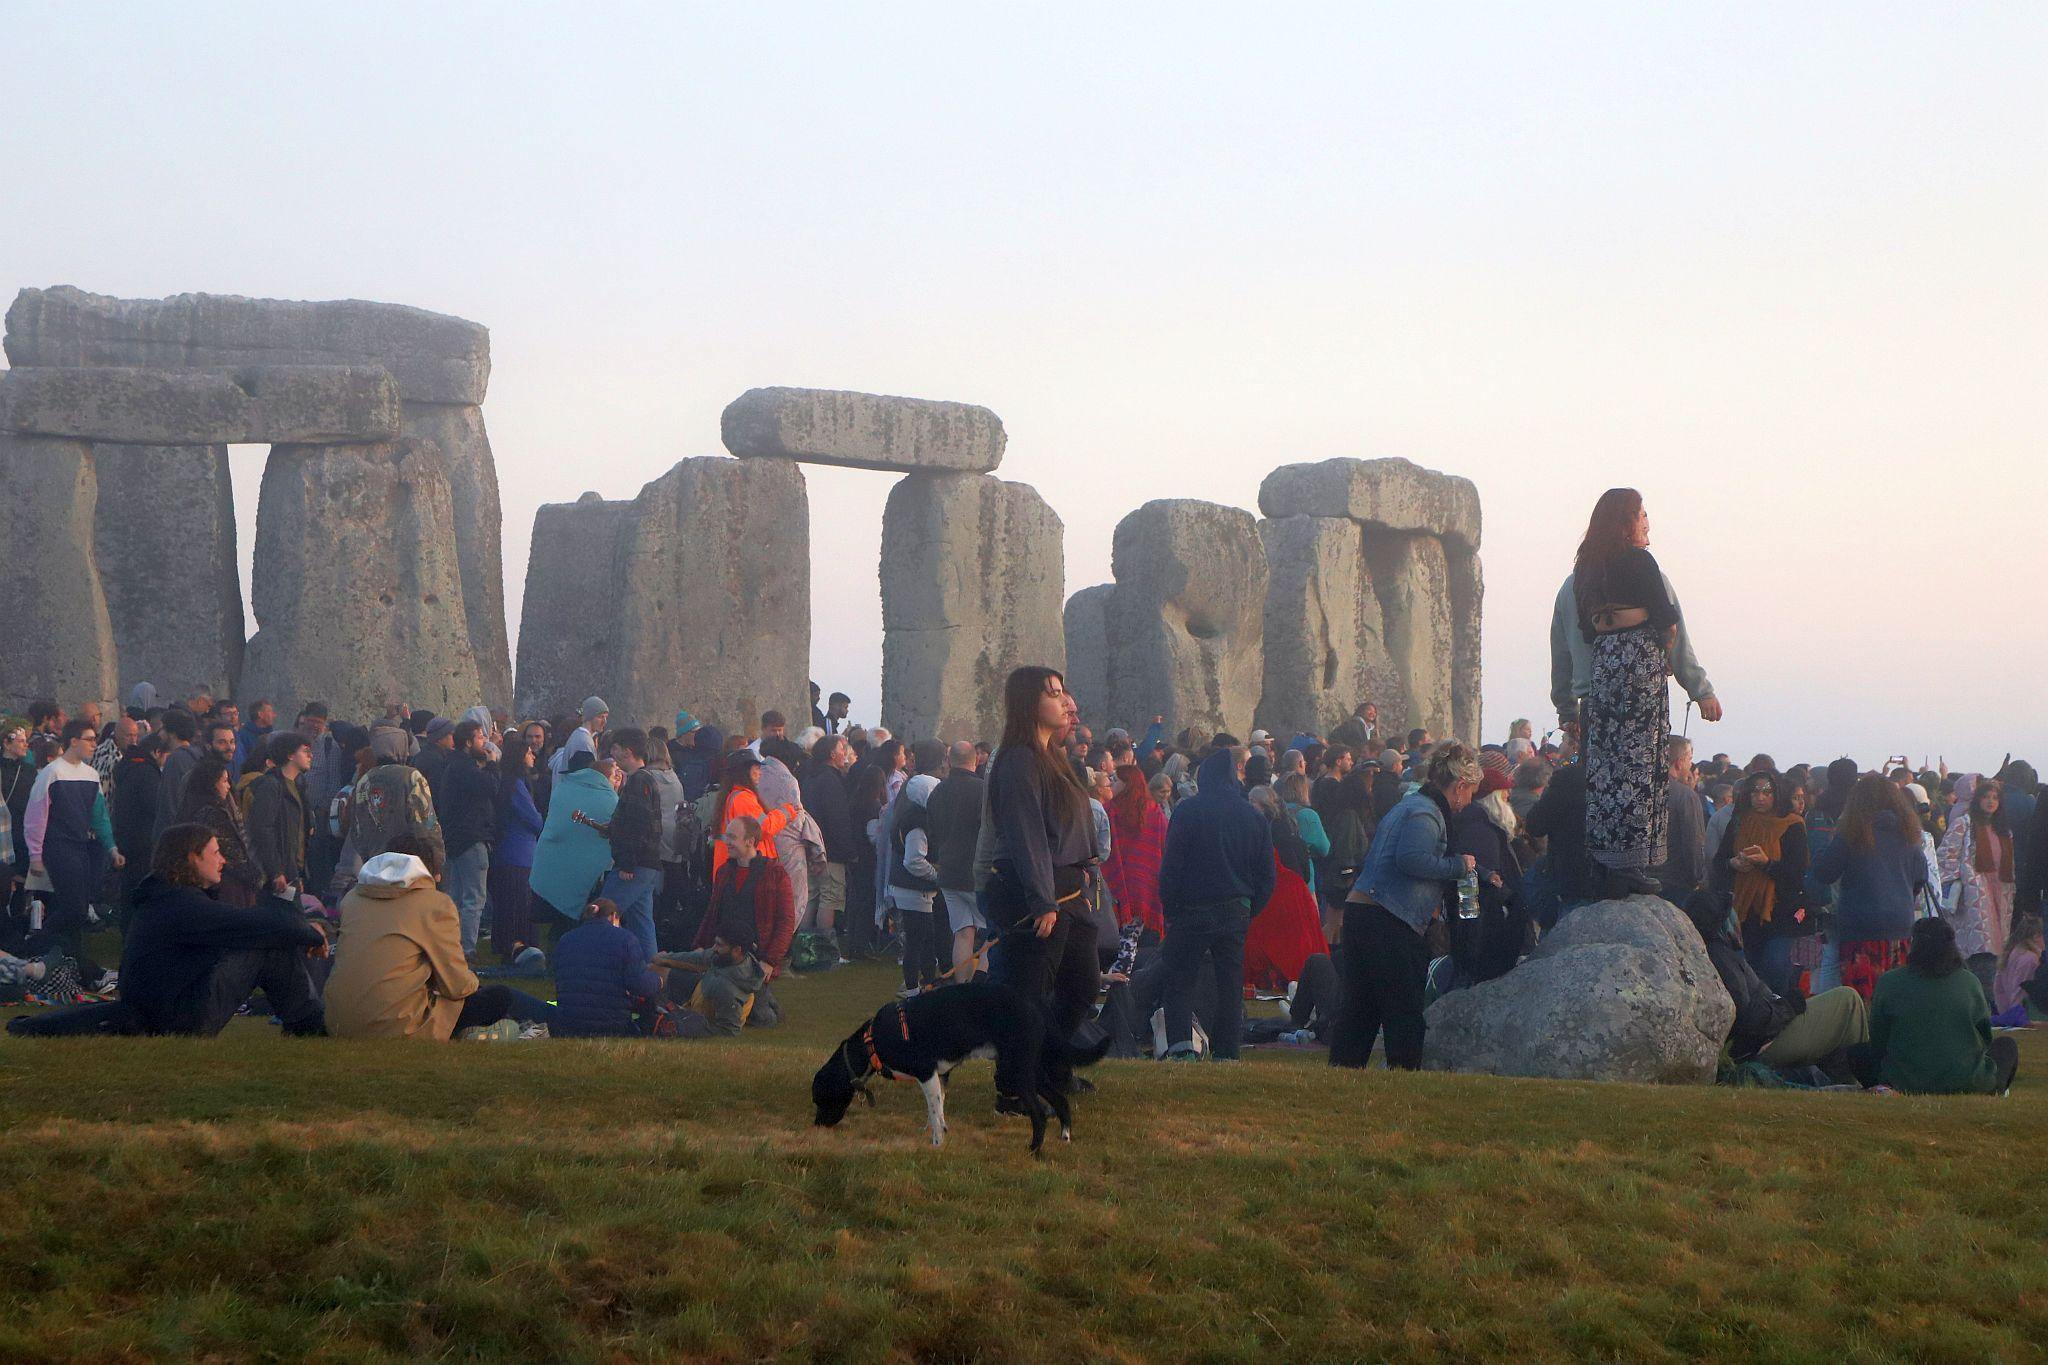 Crowds look intently for the rising sun. The 2023 Summer Solstice longest day at Stonehenge in Wiltshire, UK. Photo taken 21-Jun-2023.